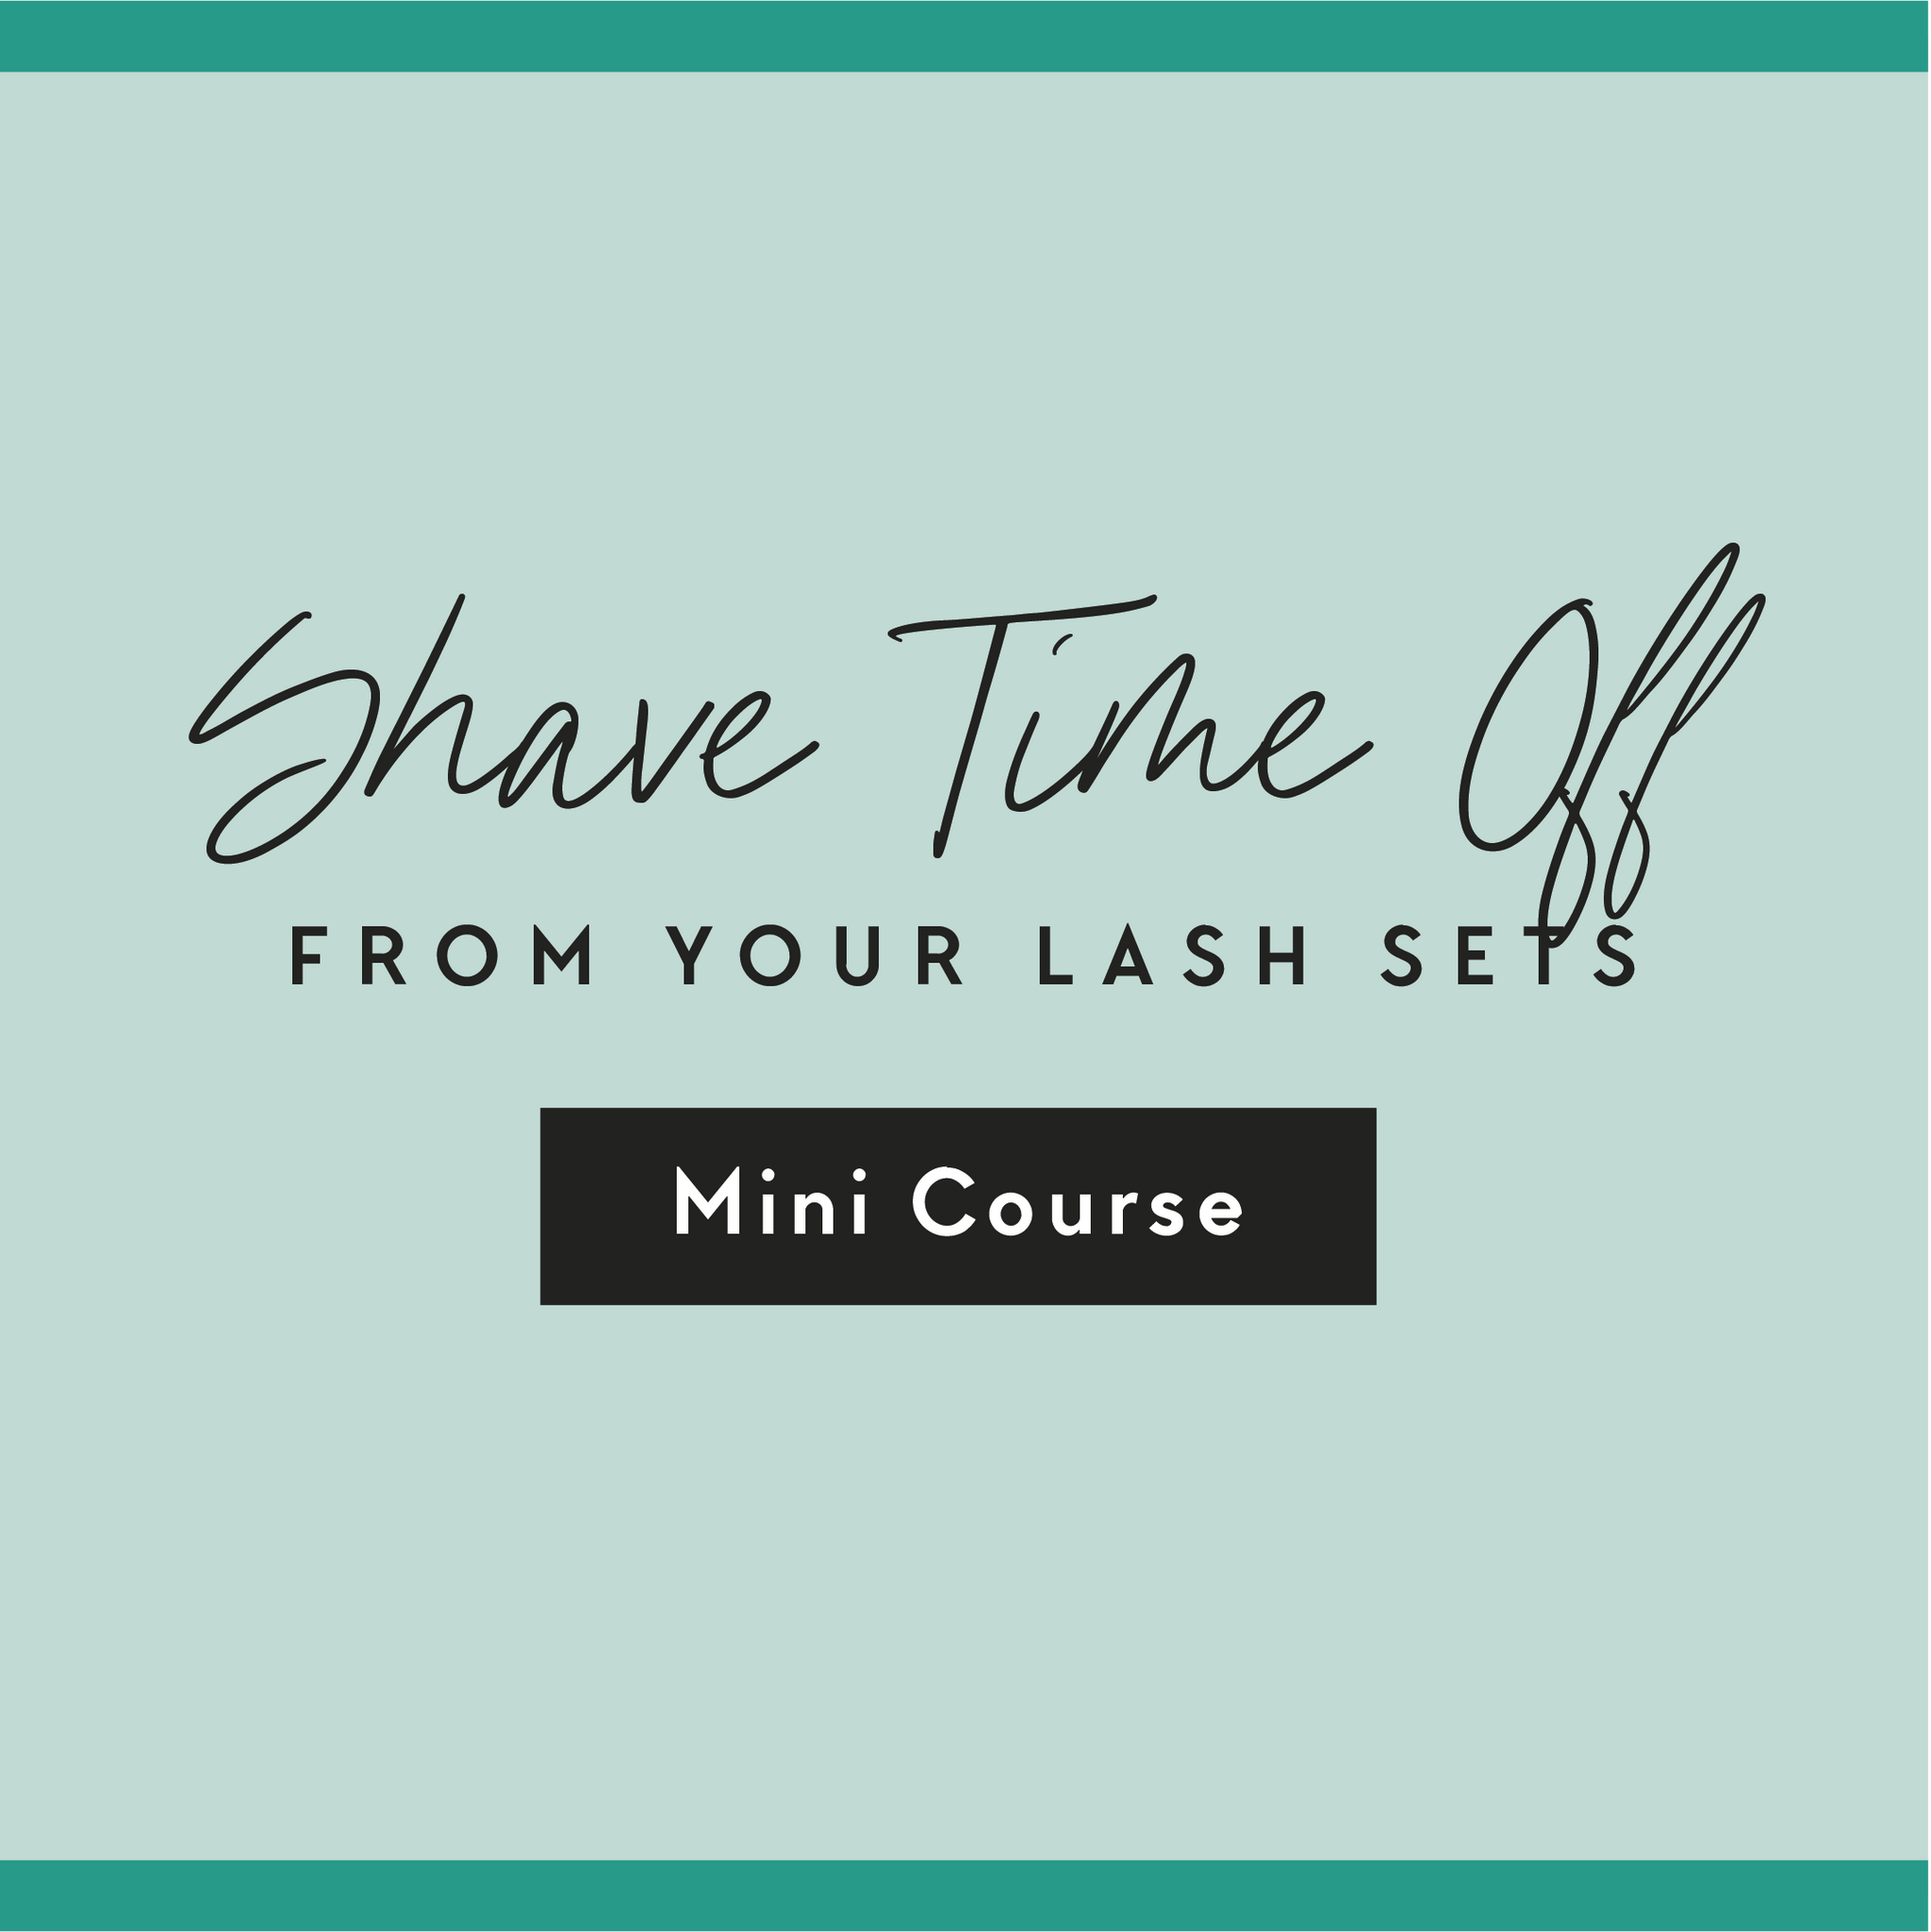 Shave Time Off From Your Lash Sets